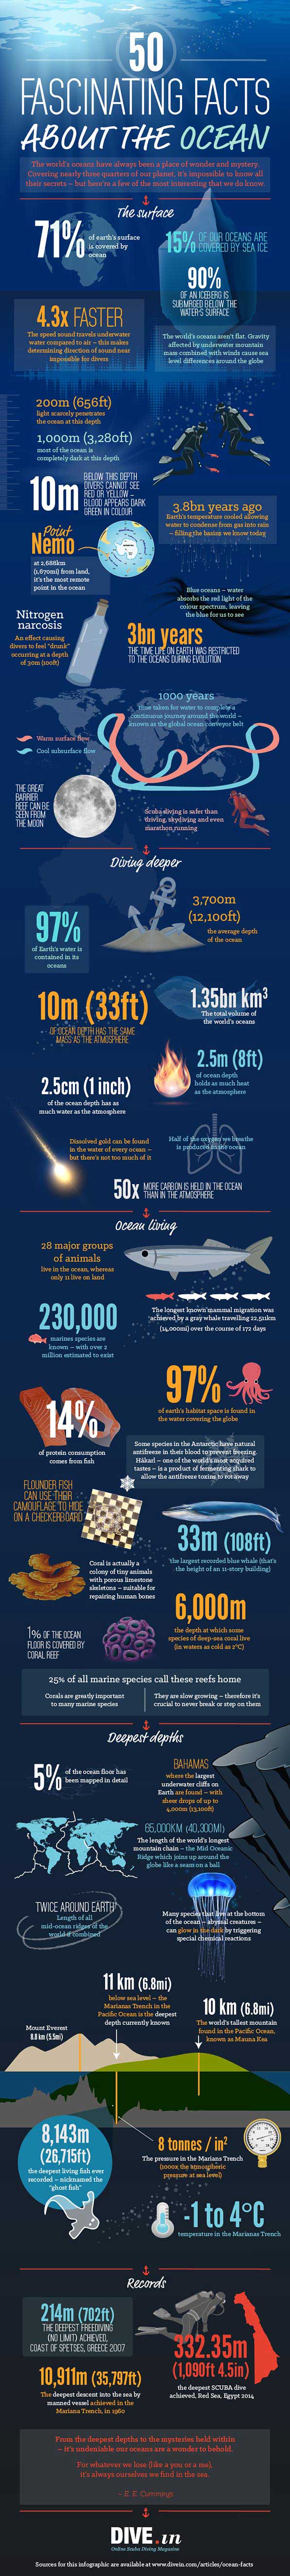 50 Fascinating Facts about the Ocean #infographic